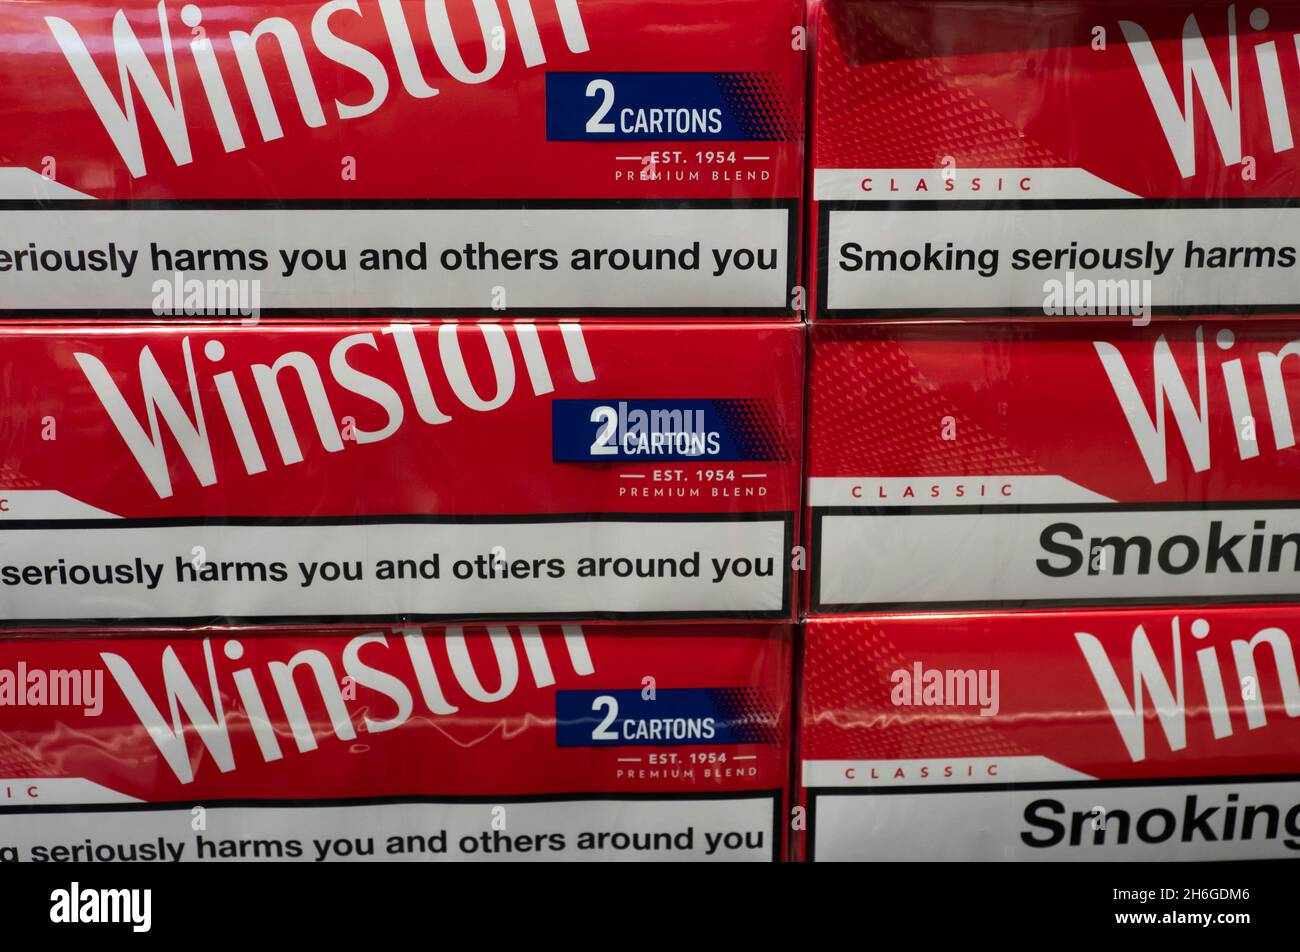 Packs of Winston cigarettes seen displayed on the shelf of a Duty Free store at the Boryspil International Airport. Stock Photo